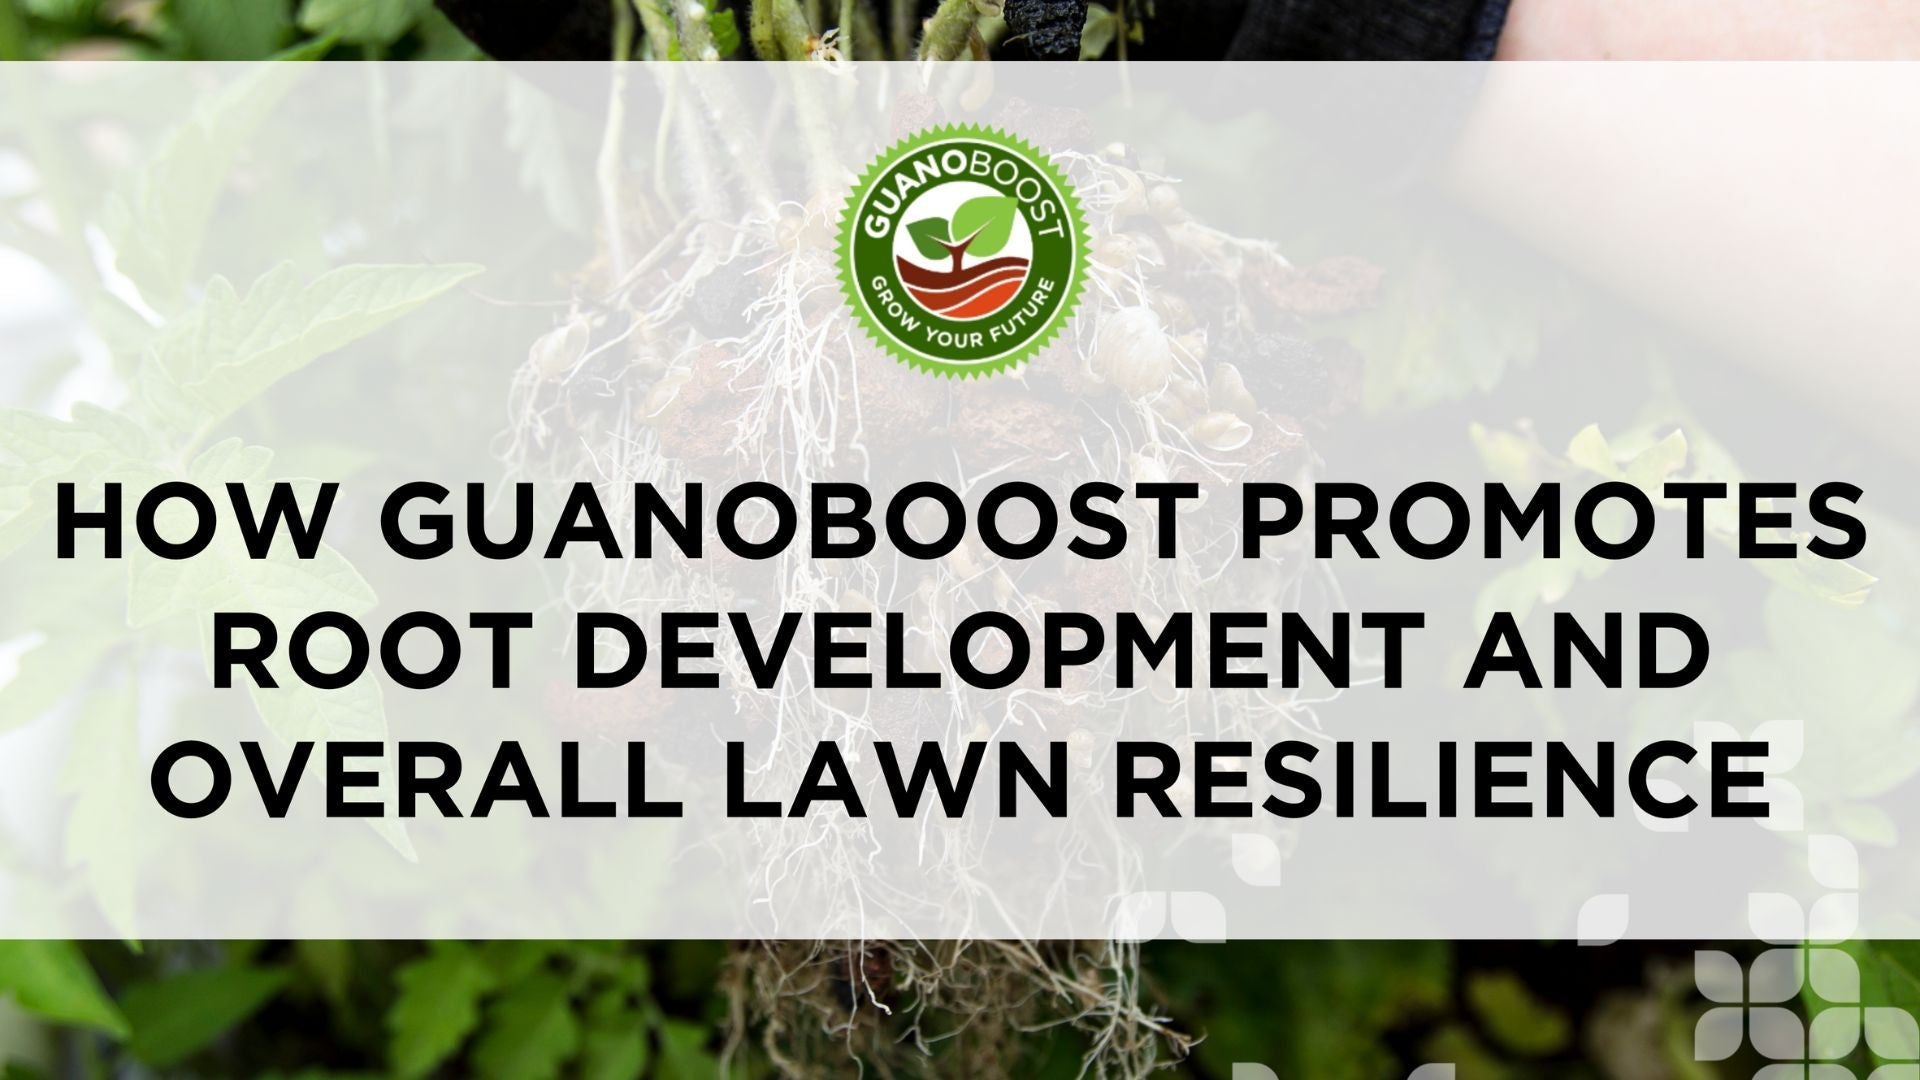 How GuanoBoost Promotes Root Development and Overall Lawn Resilience - GuanoBoost